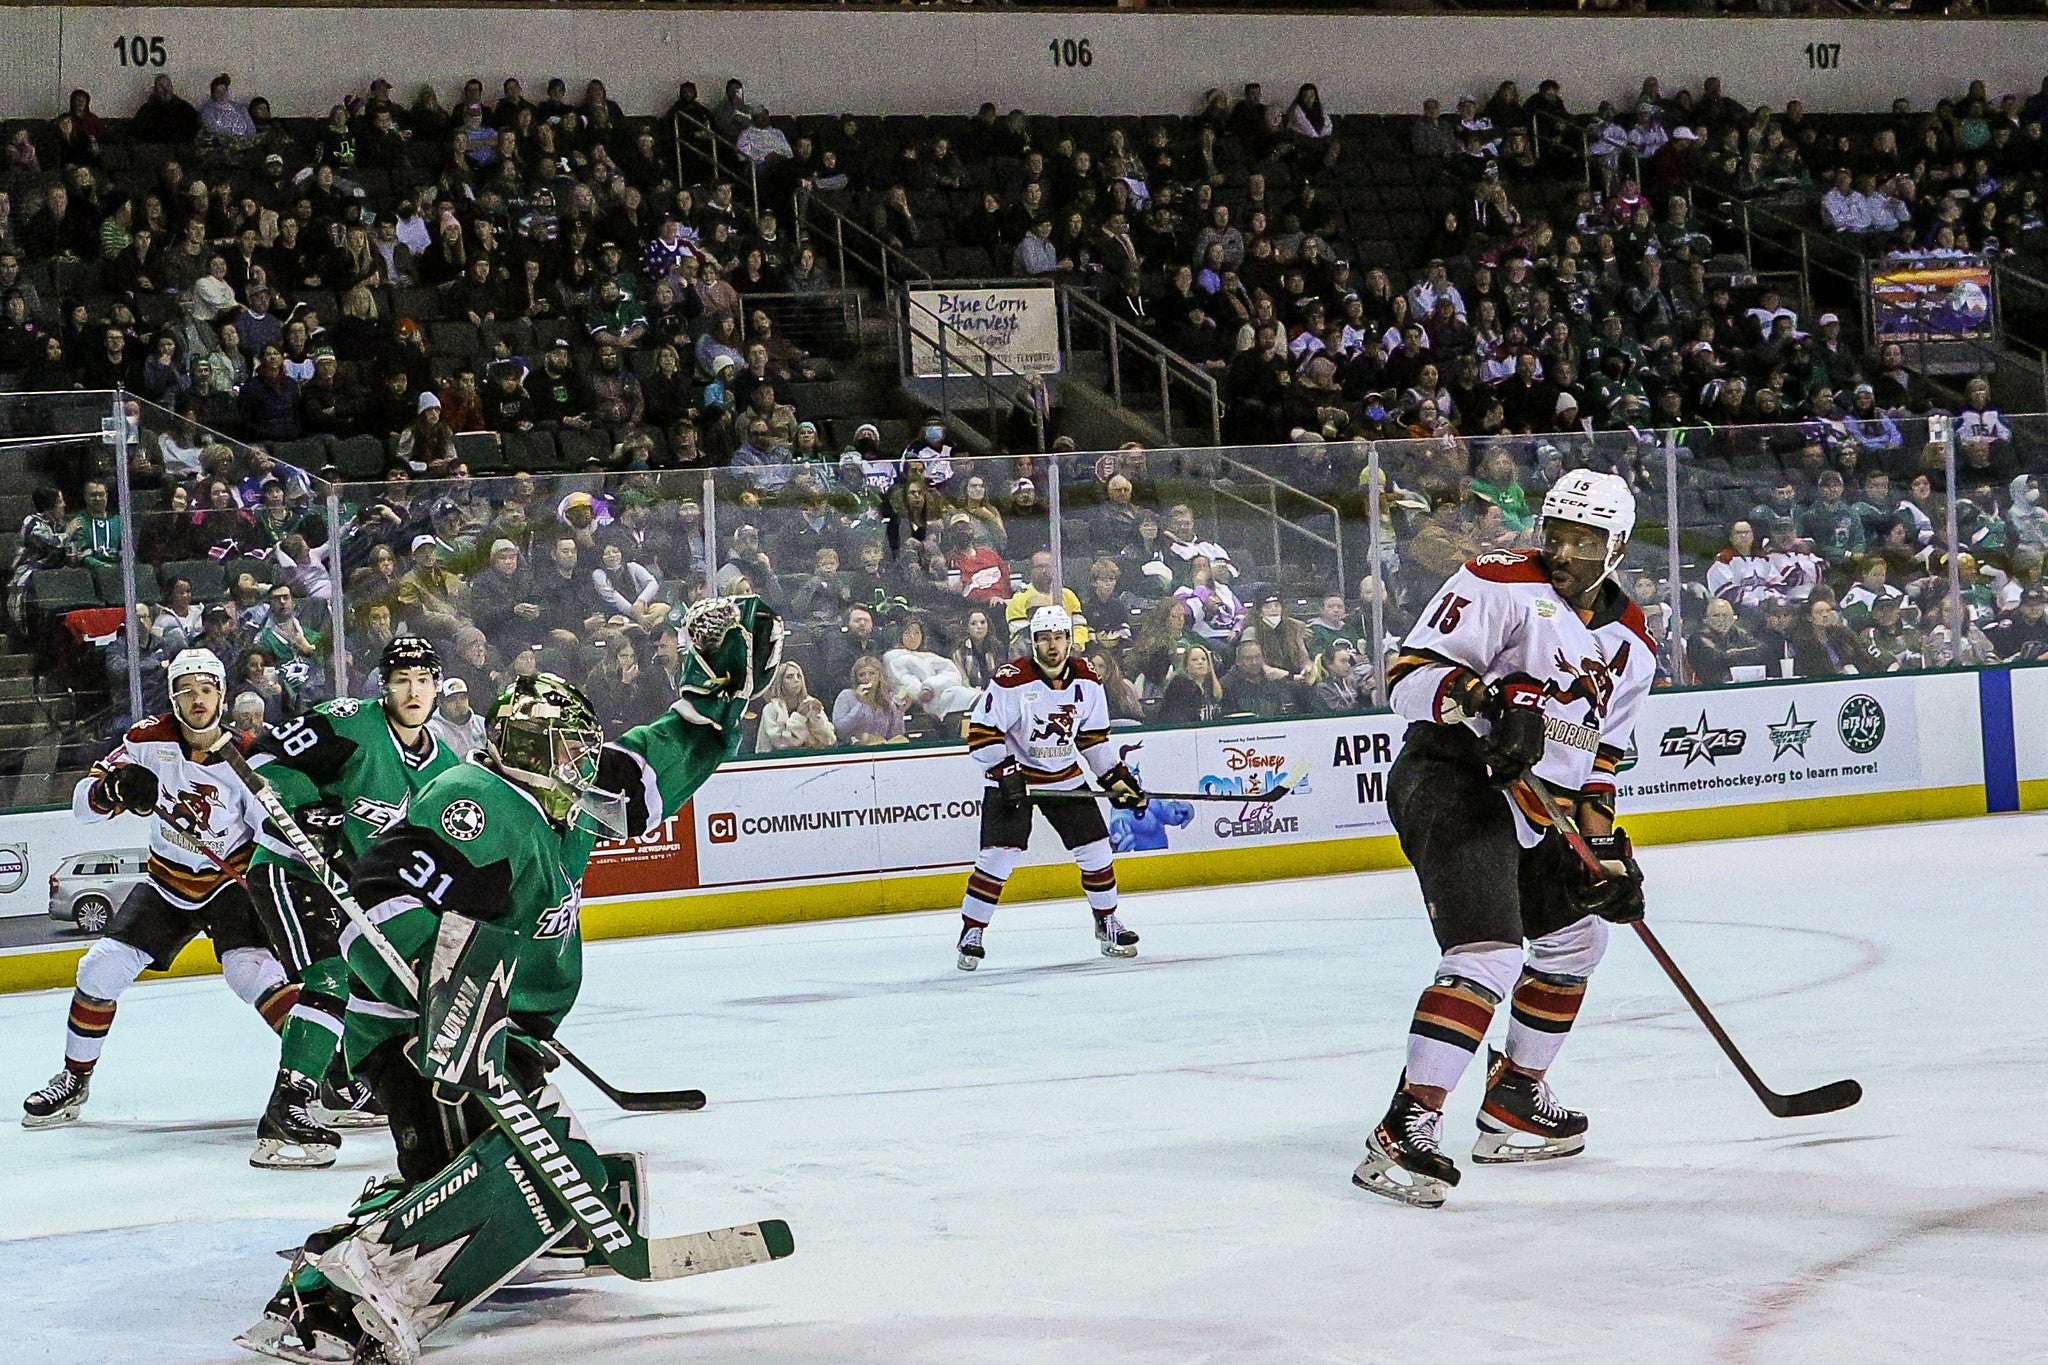 Tonights Texas Stars Game is Sold Out Texas Stars AHL Affiliate to Dallas Stars